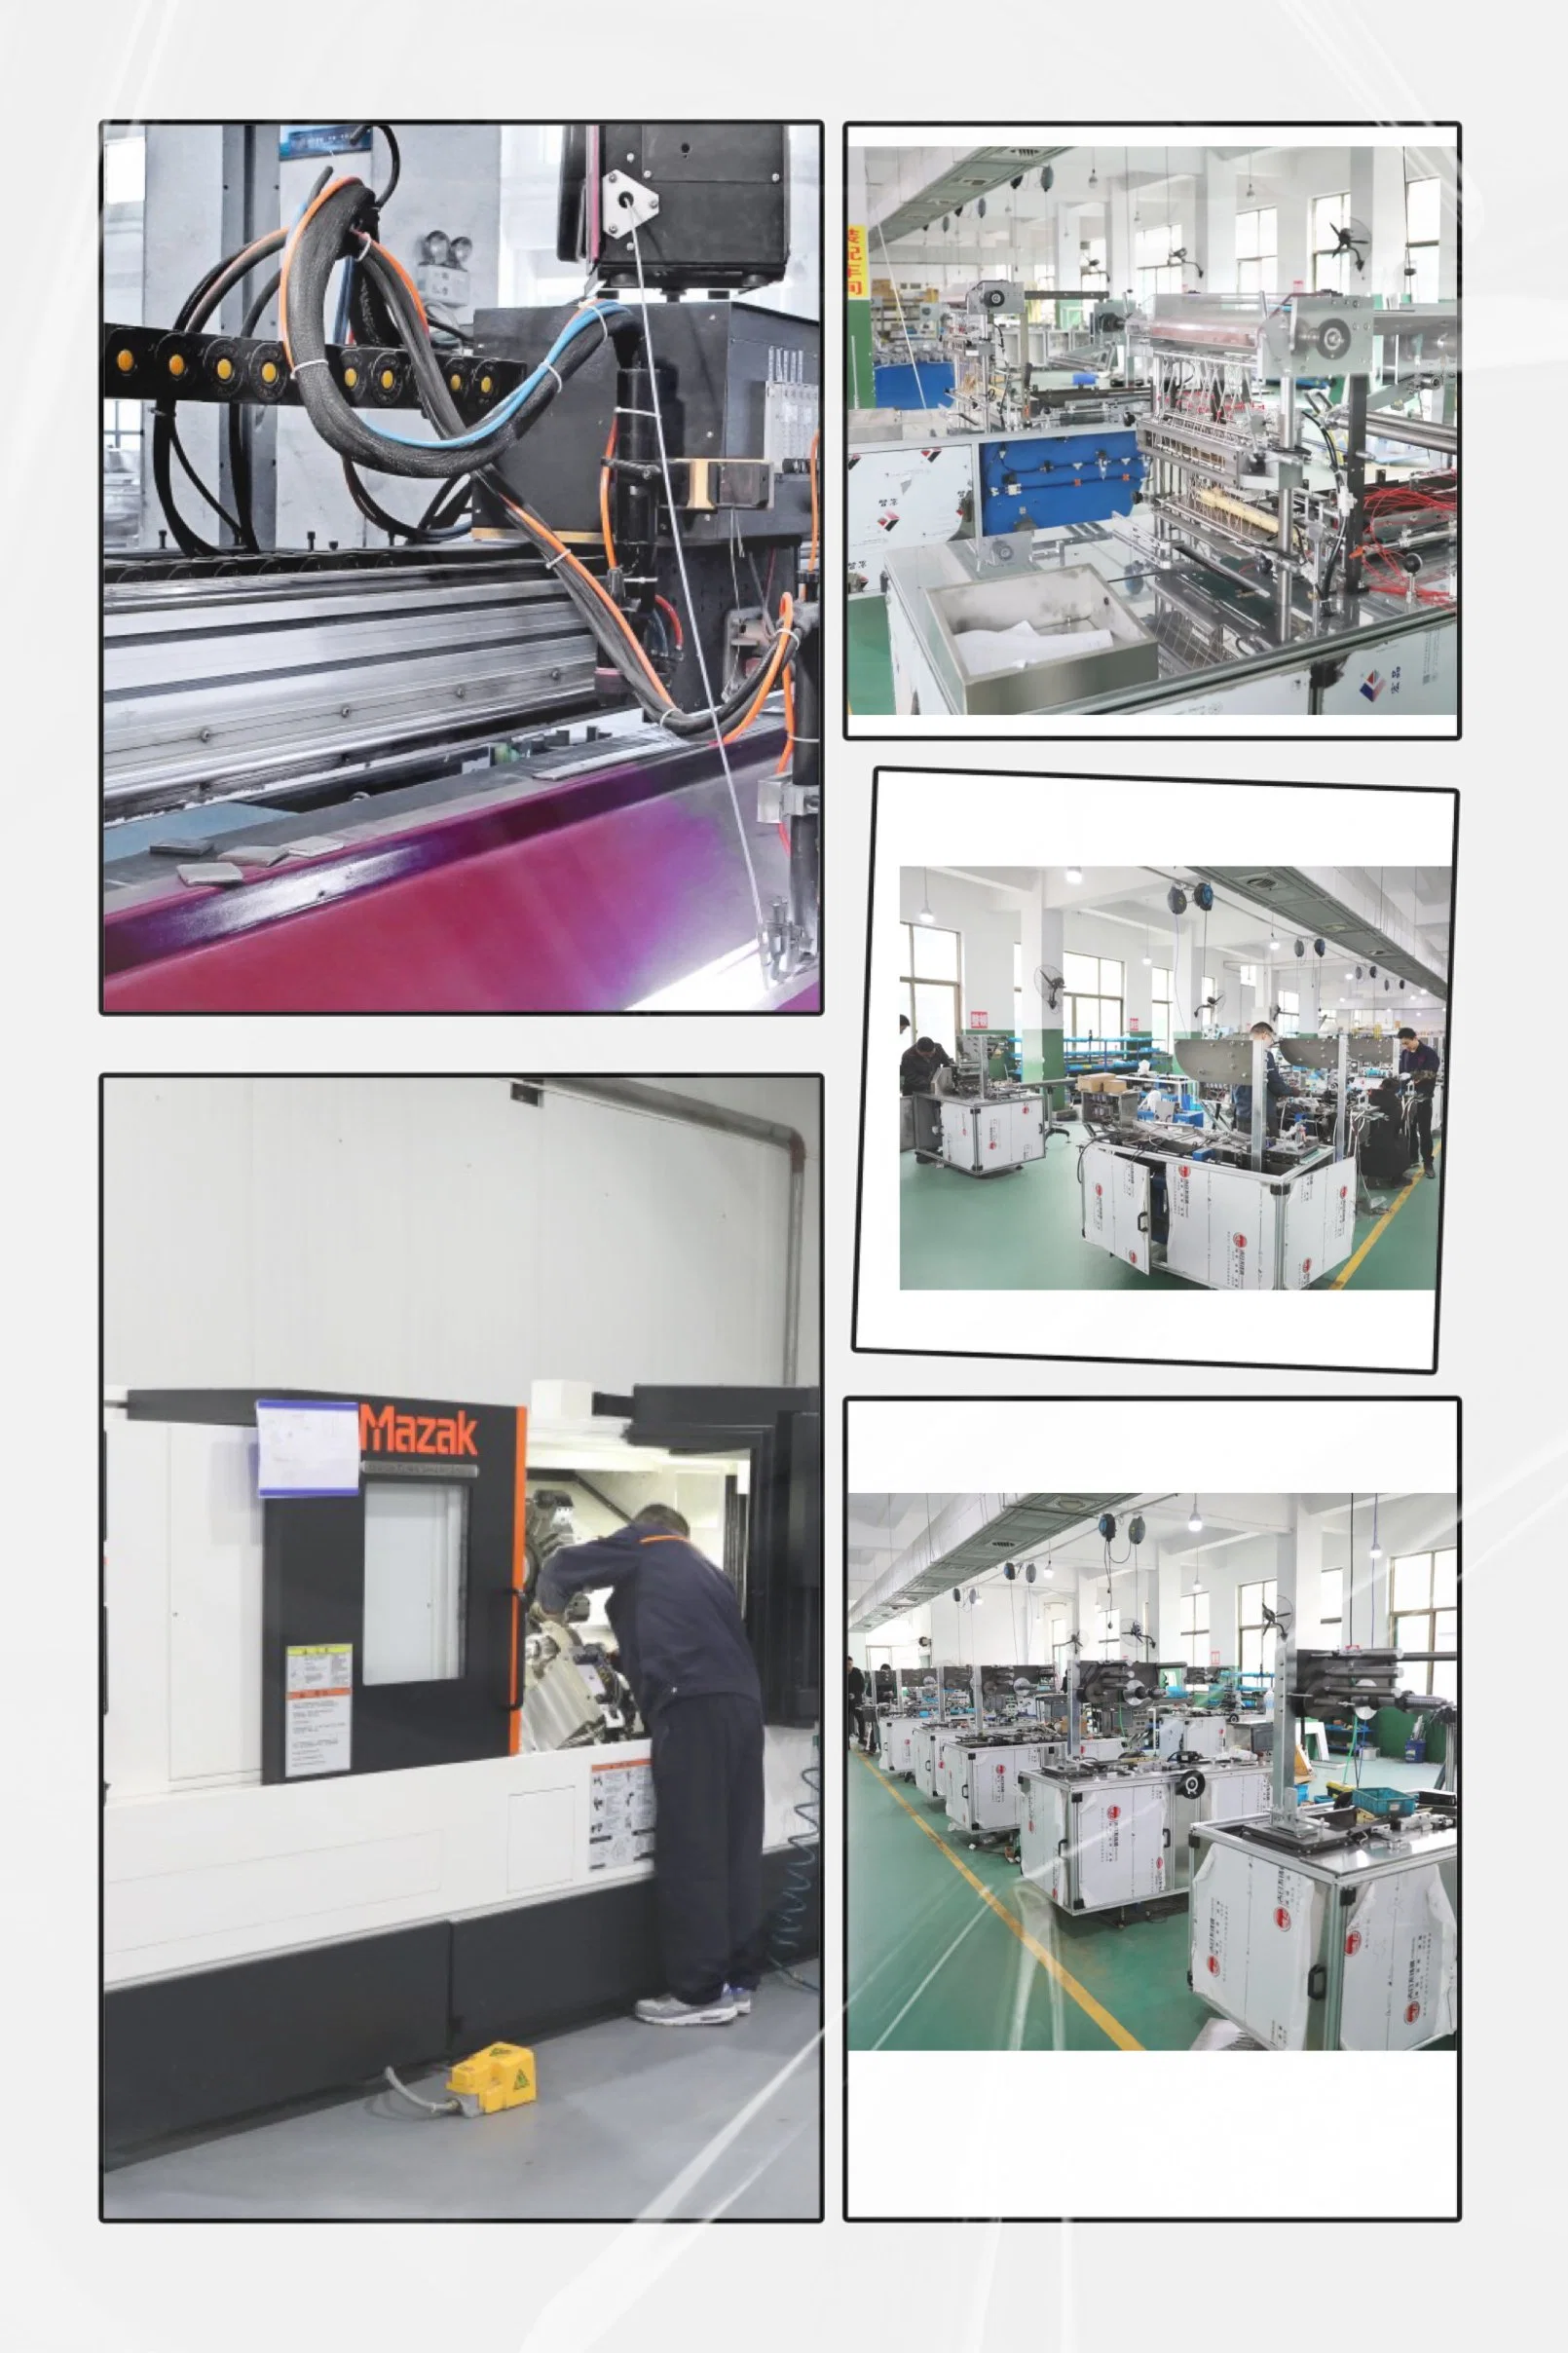 CD DVD Stationery and Other Industries Box Cellophane Overwrapping Packing Machine